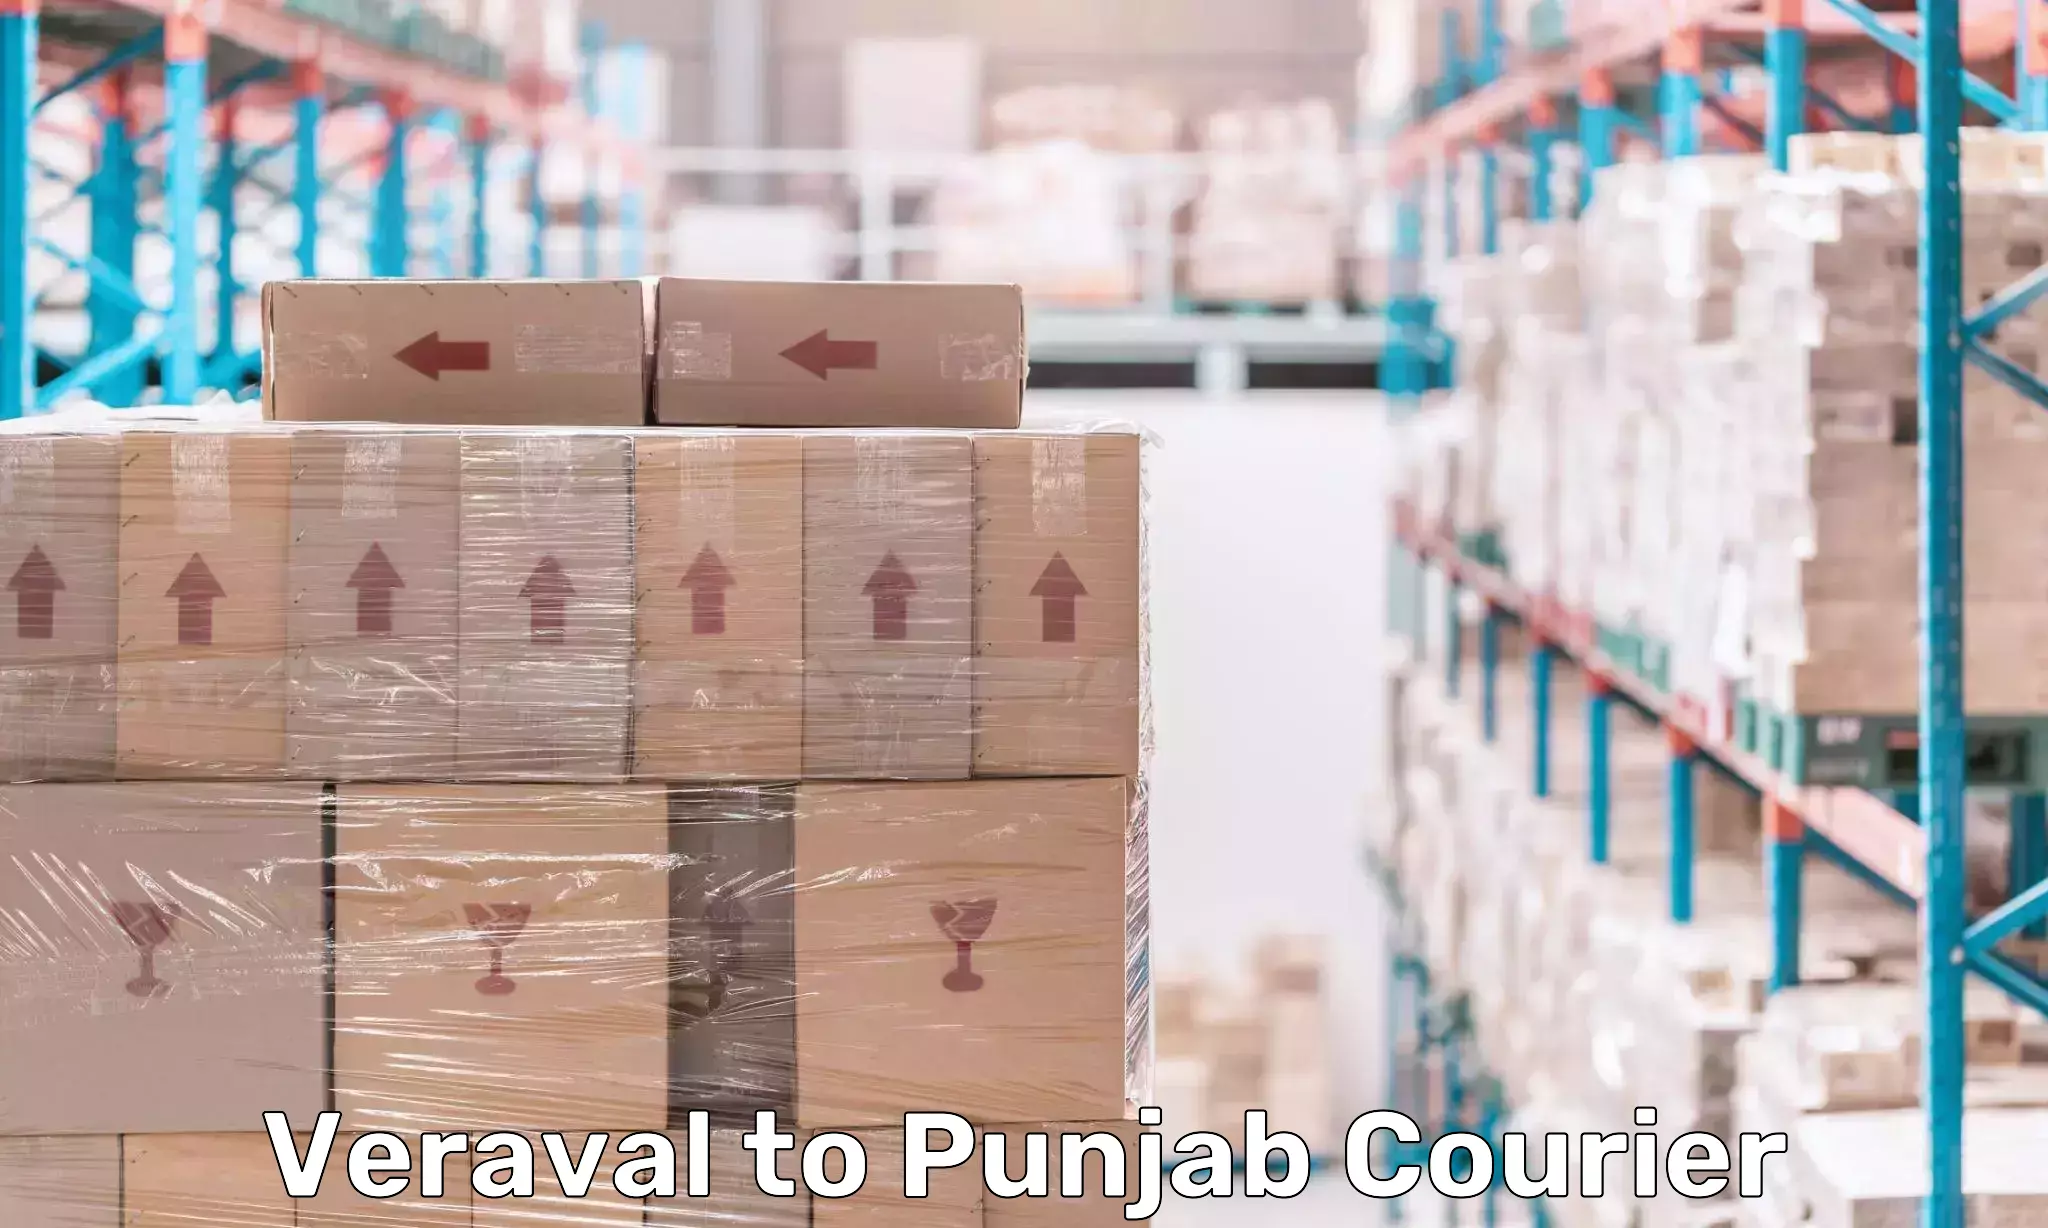 On-demand courier Veraval to Punjab